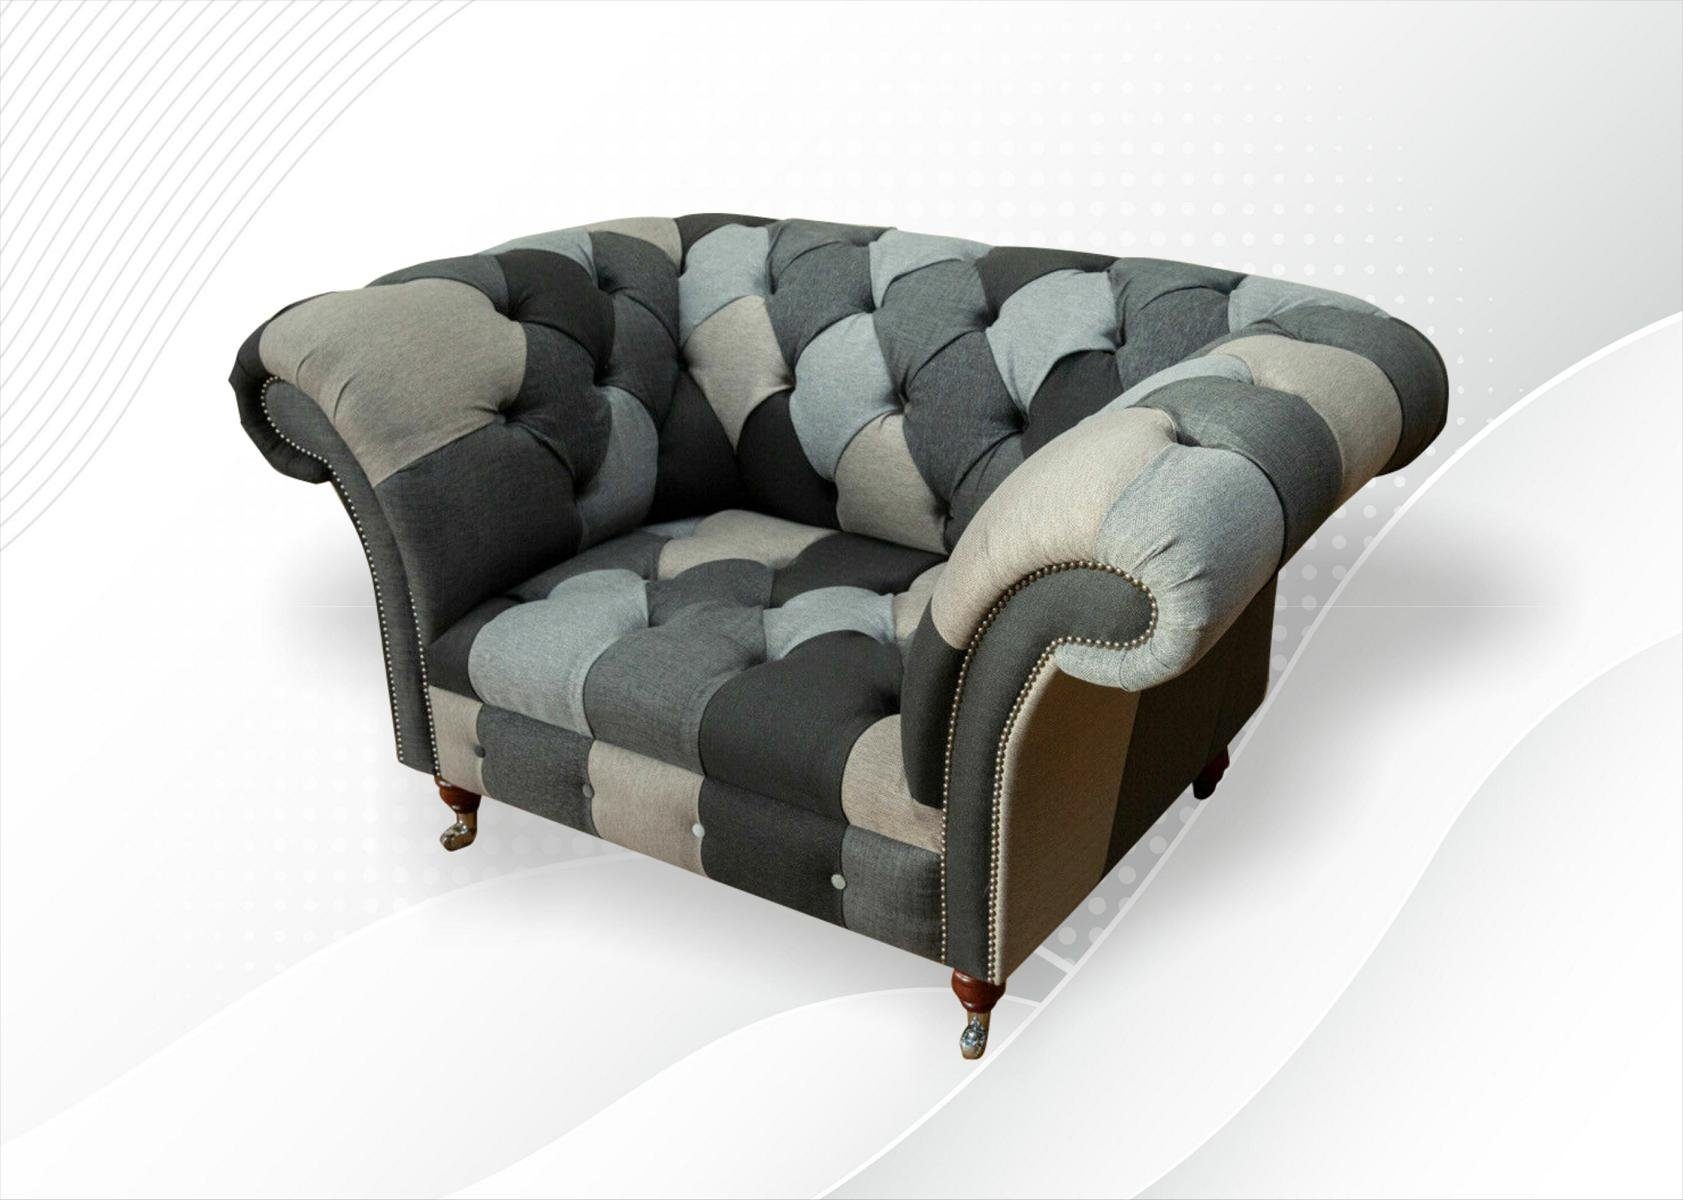 Chesterfield Couch Made Sitzer JVmoebel Designer Polster Sofa Europe Stoff Sessel Luxus 1.5 in Sofa,